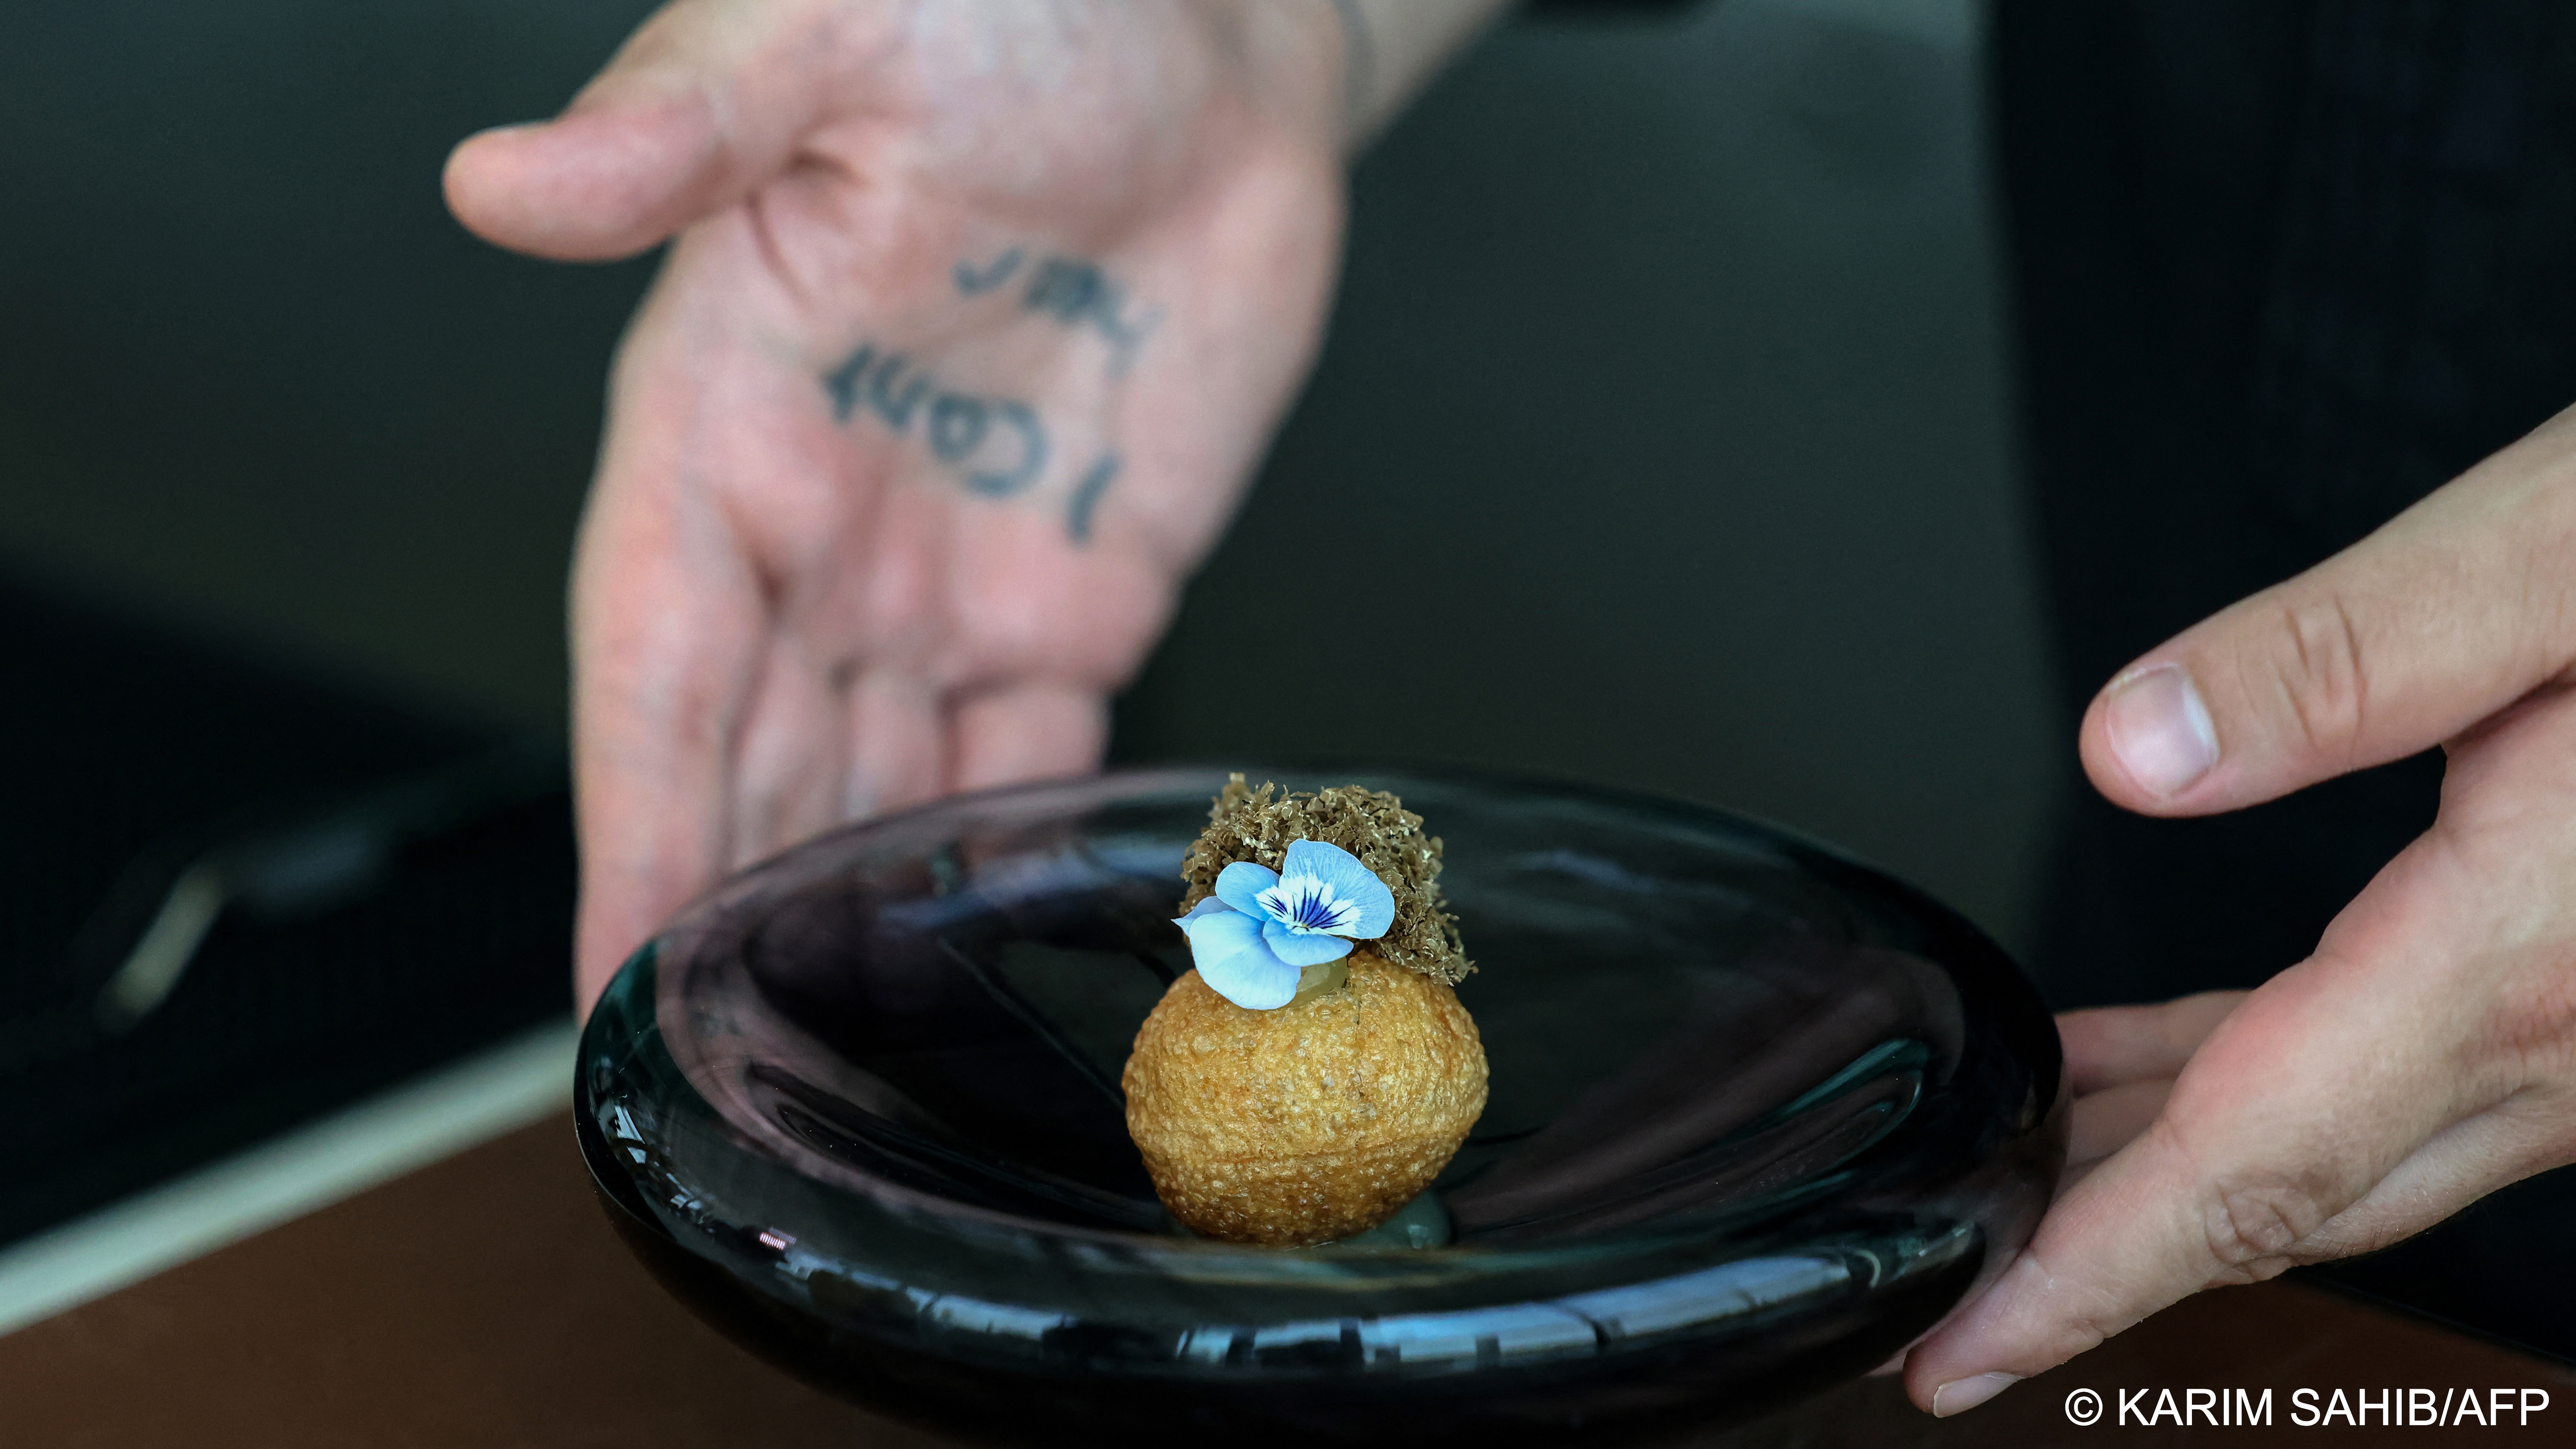 Hands present a delicate haute cuisine dish topped with an edible flower (image: Karim SAHIB/AFP)